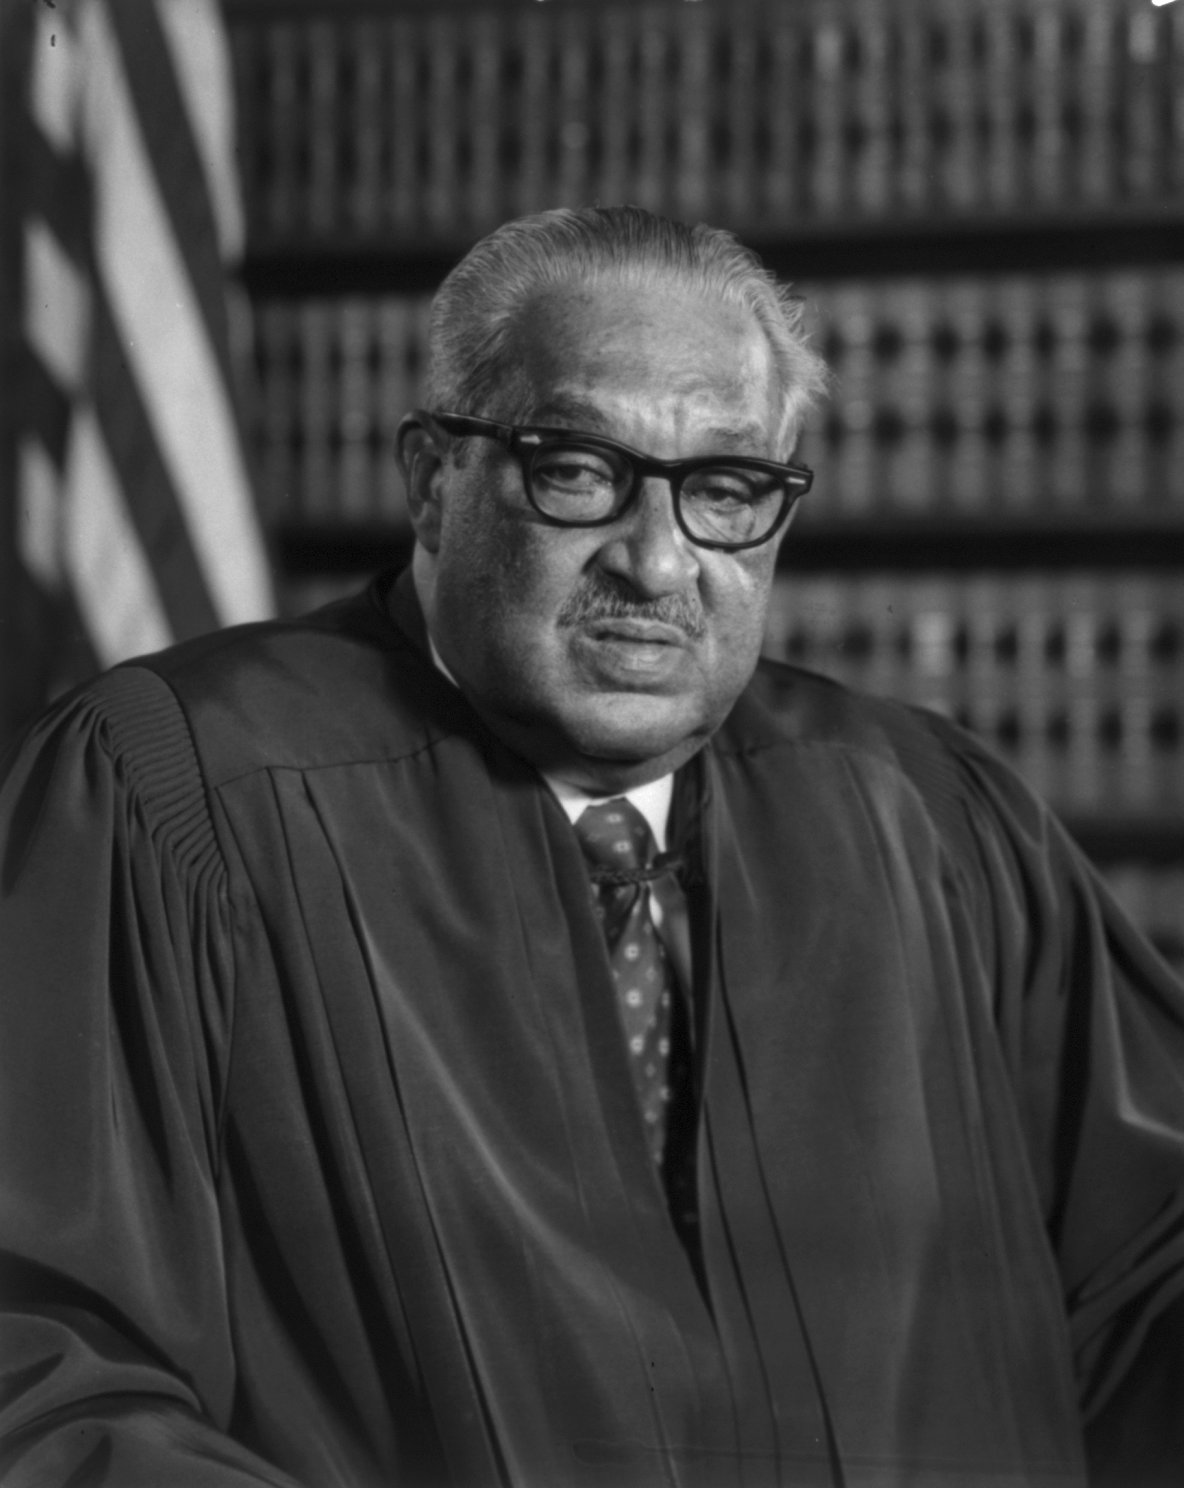     Images  U S  Supreme Court Justice Thurgood Marshall Official Portrait